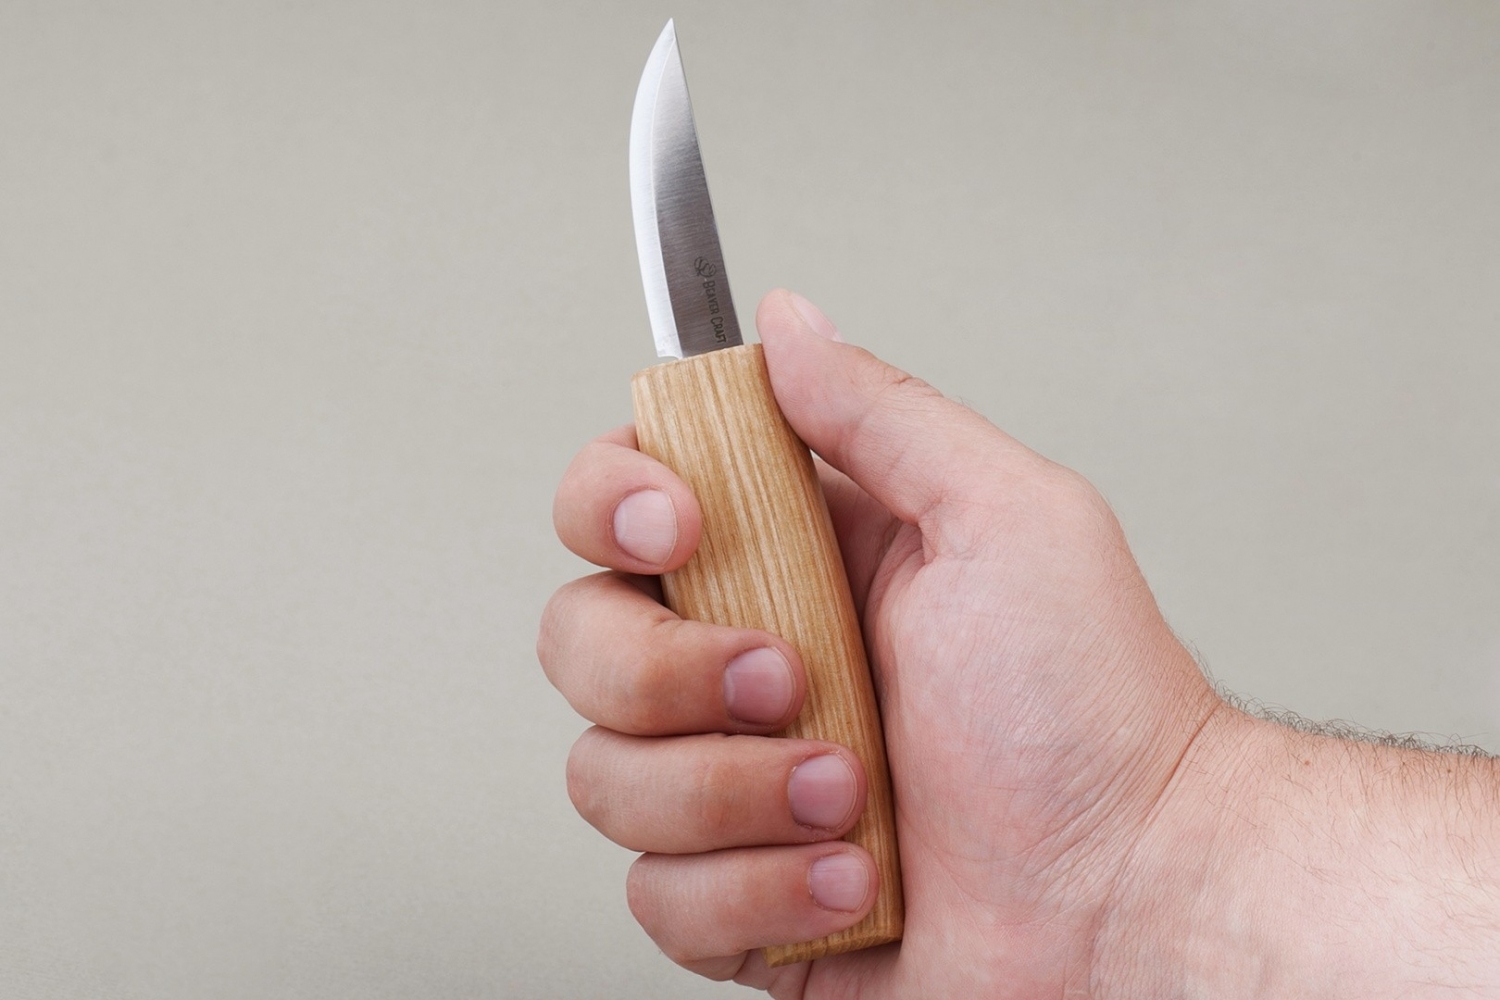 Beaver Craft Wood Carving Knife - C1 Small